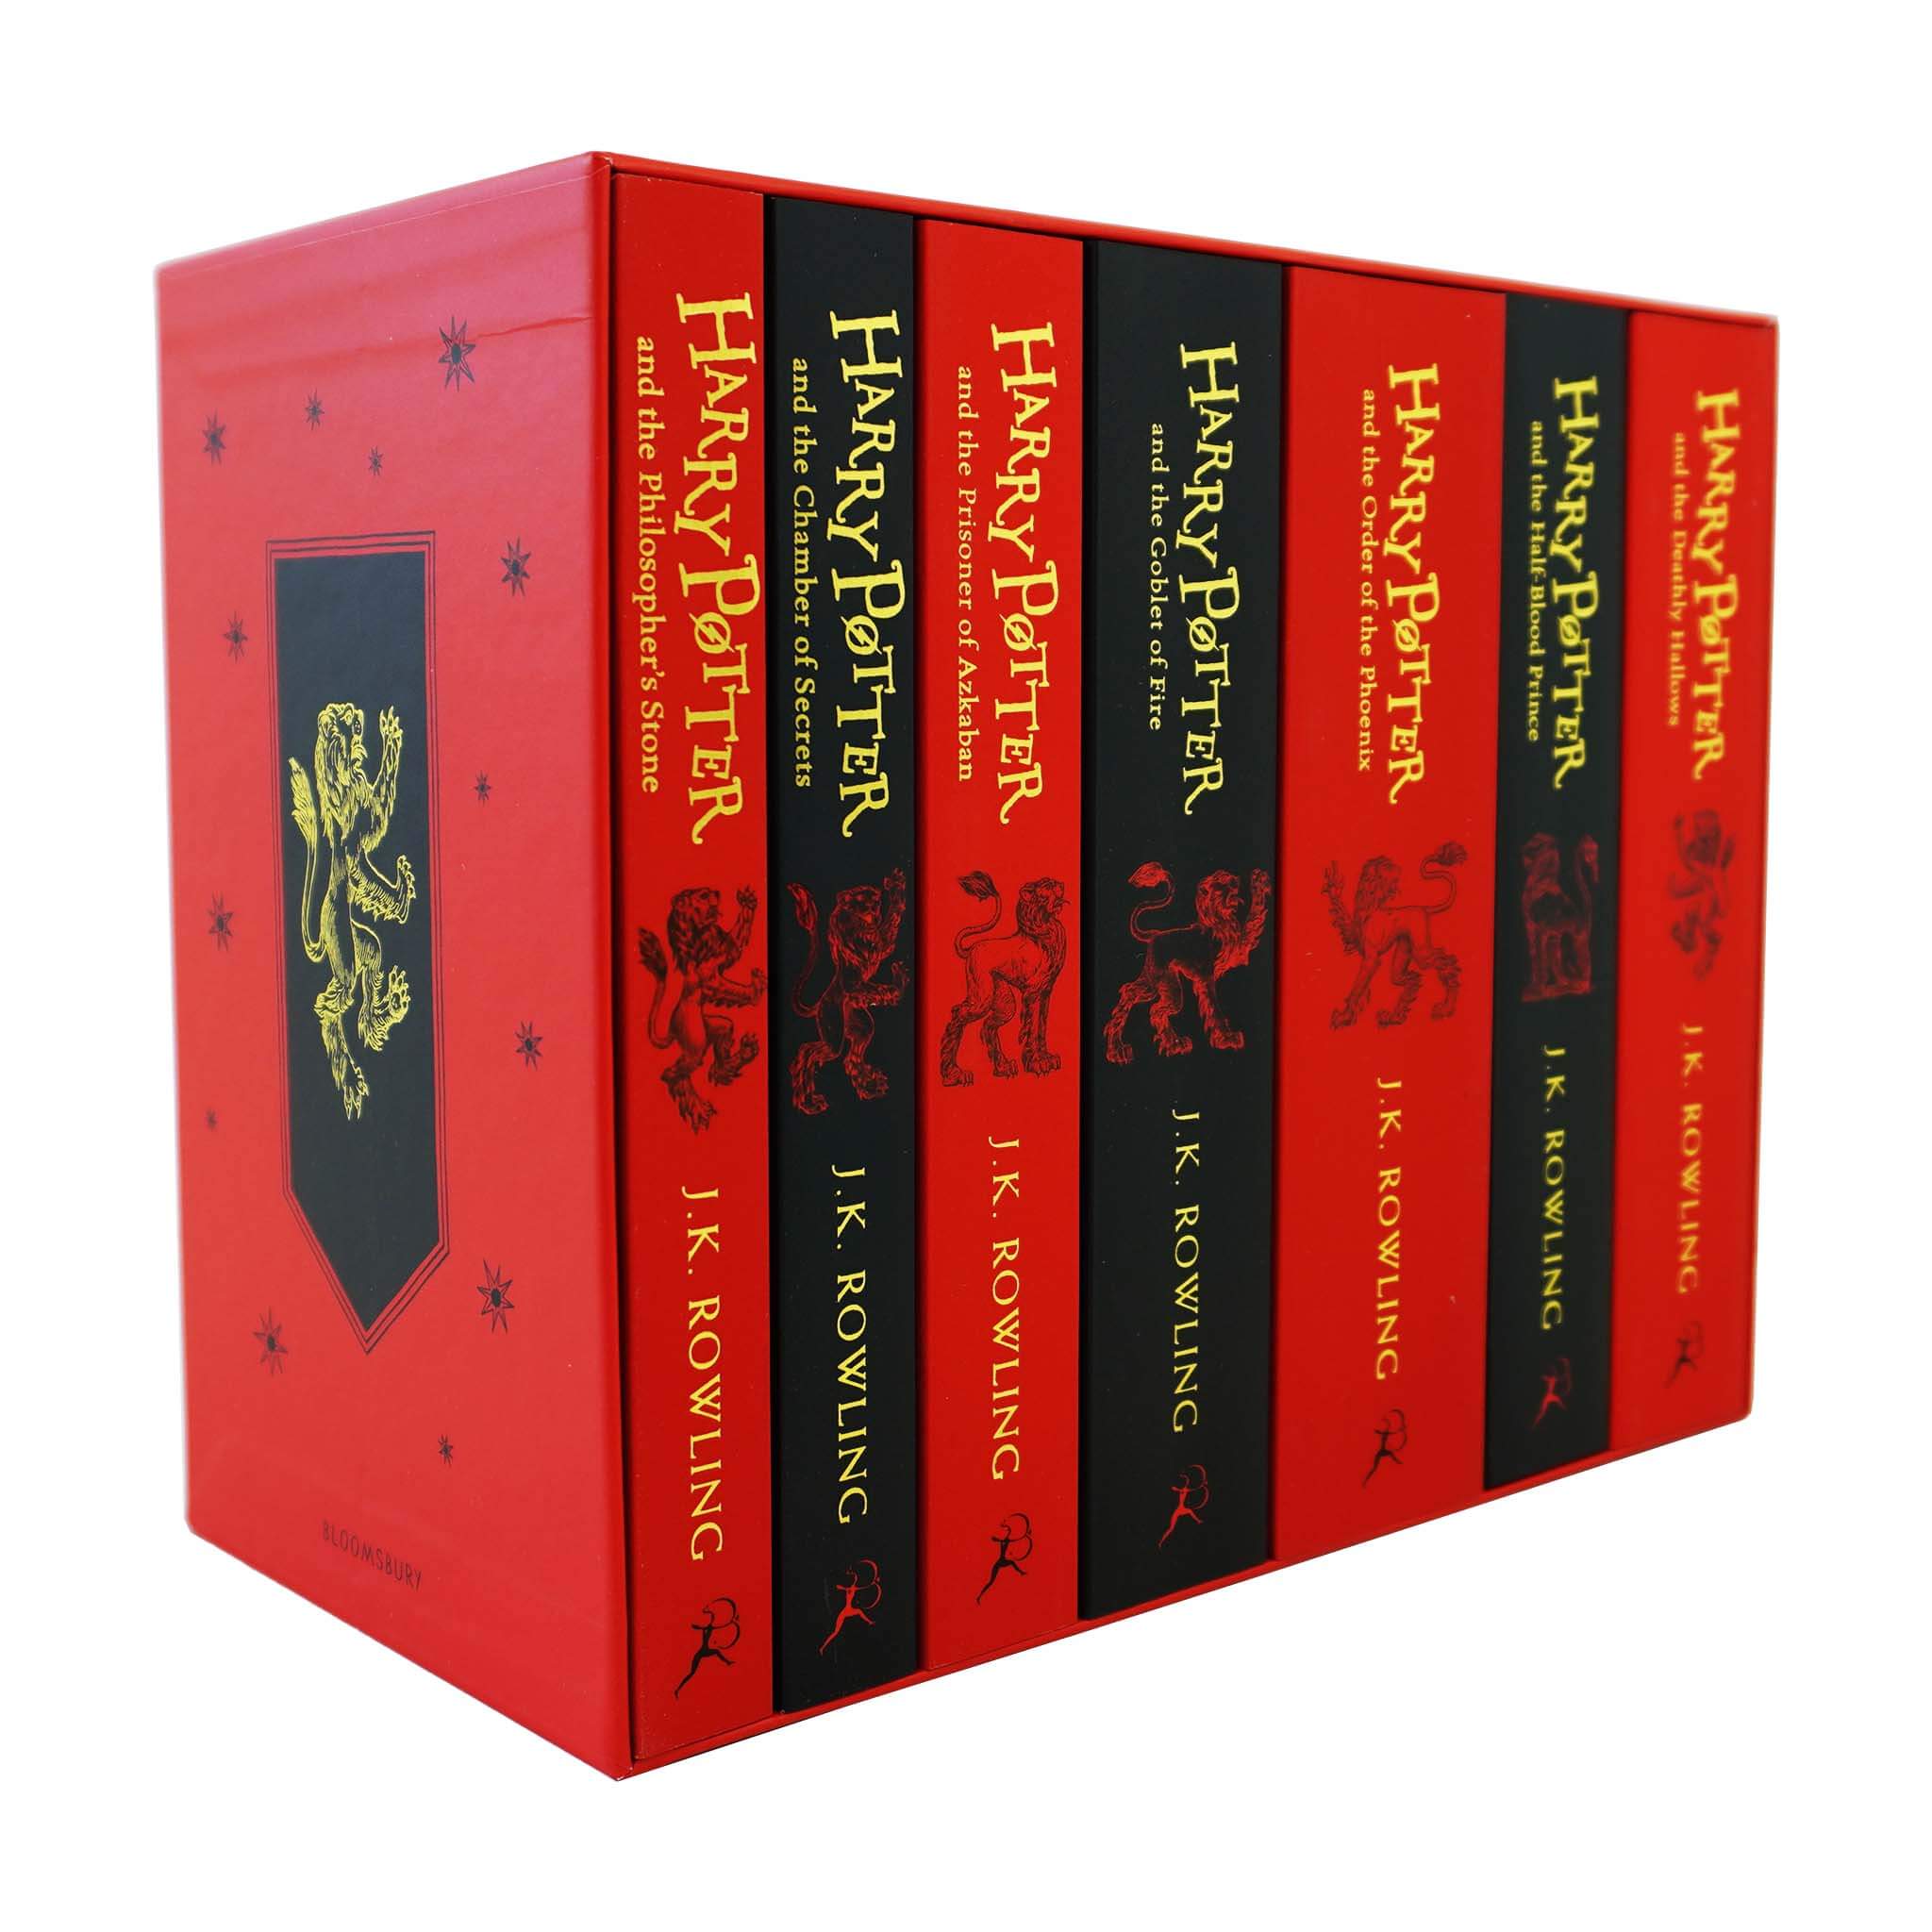 Harry Potter House Edition Box Set in 4 Options: J.K.Rowl